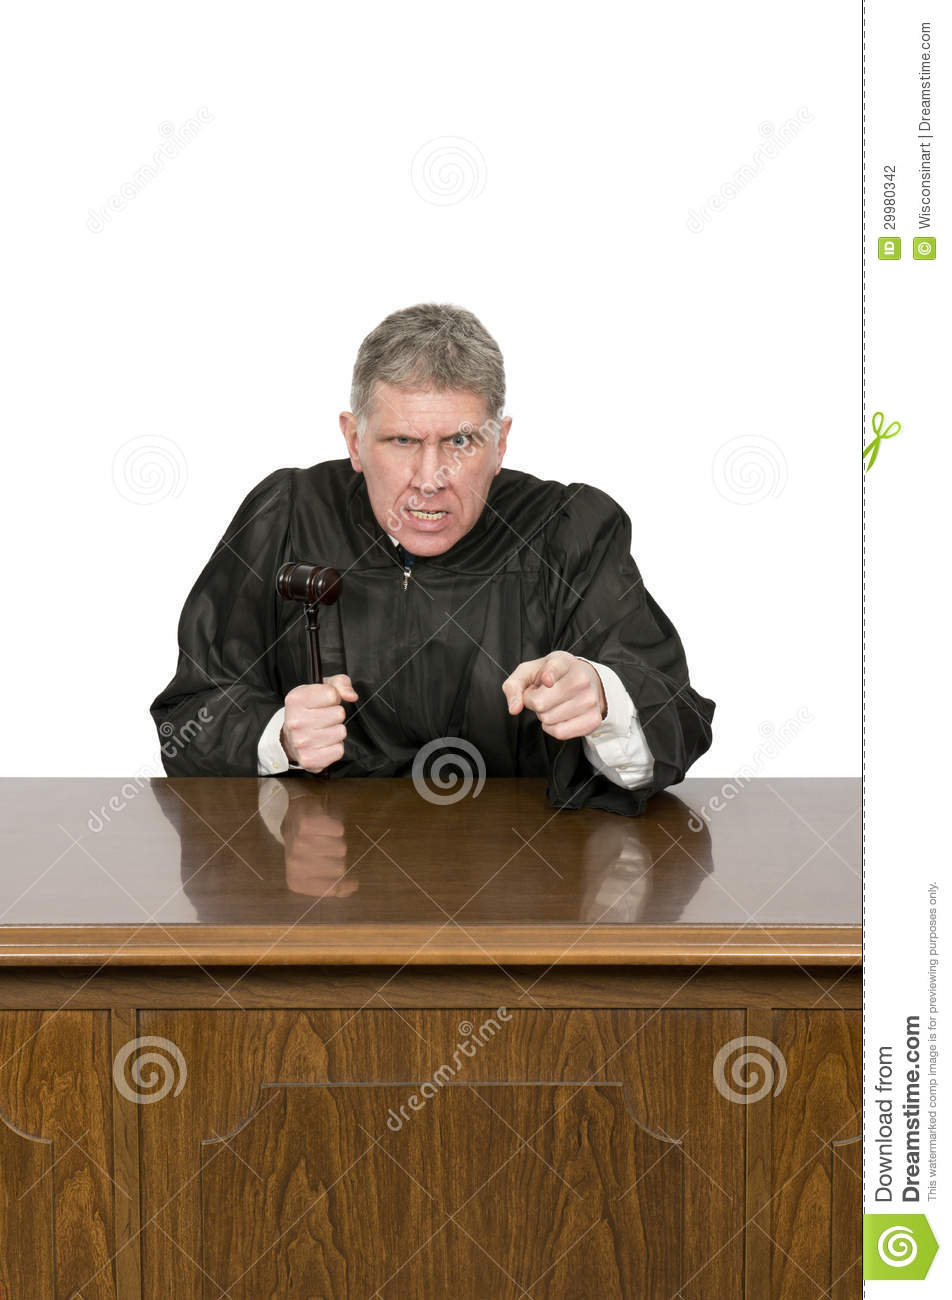 Angry Judge Clipart Mean Angry Law Judge With